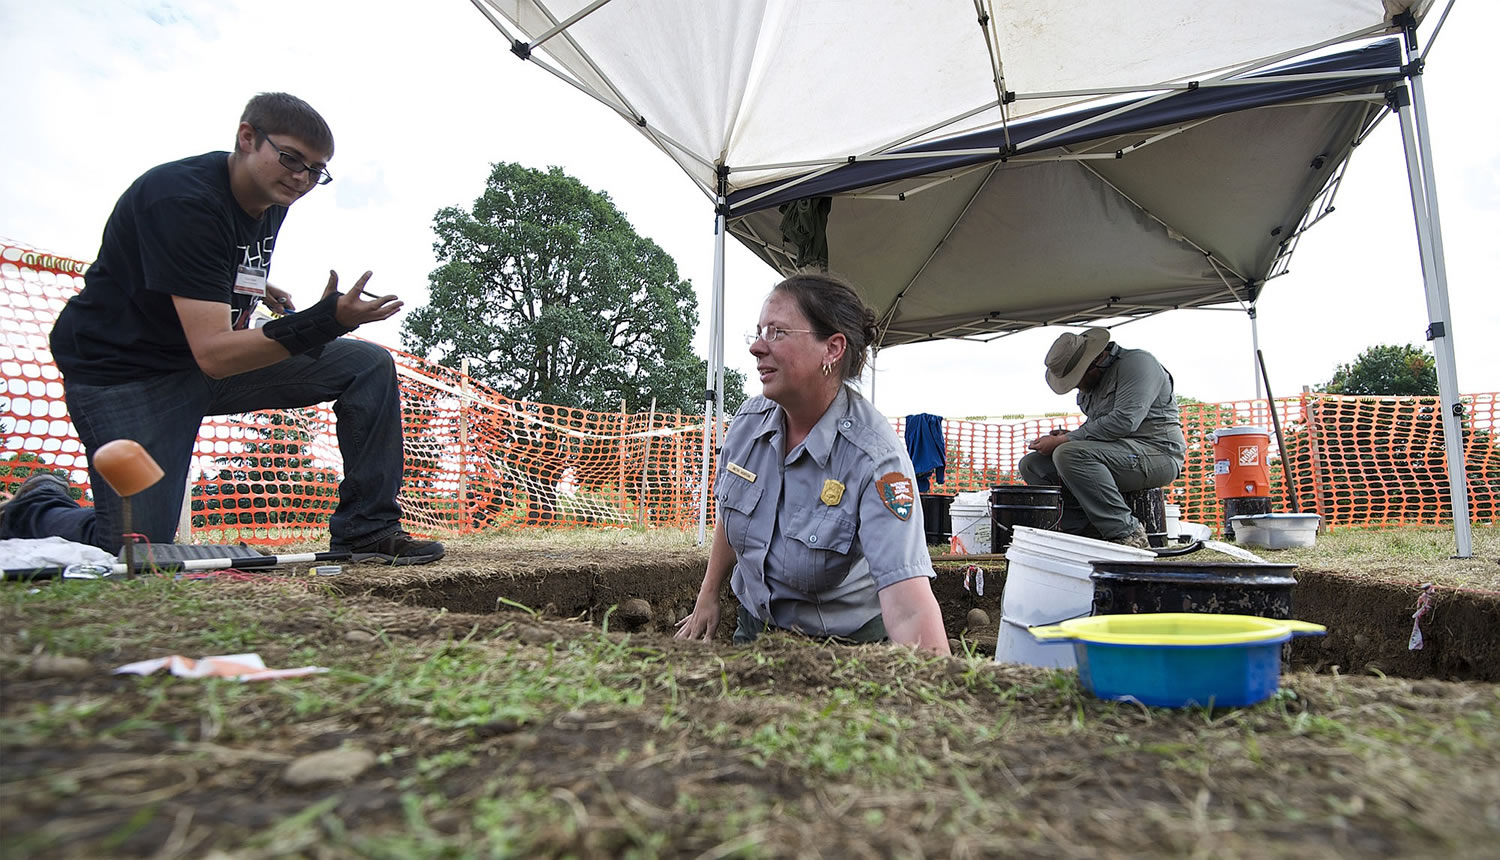 Portland State University student Tyler Molter, from left, takes an artifact Tuesday from National Park Service archeologist Beth Horton during excavation of a flag pole site on the Parade Ground at Vancouver Barracks.